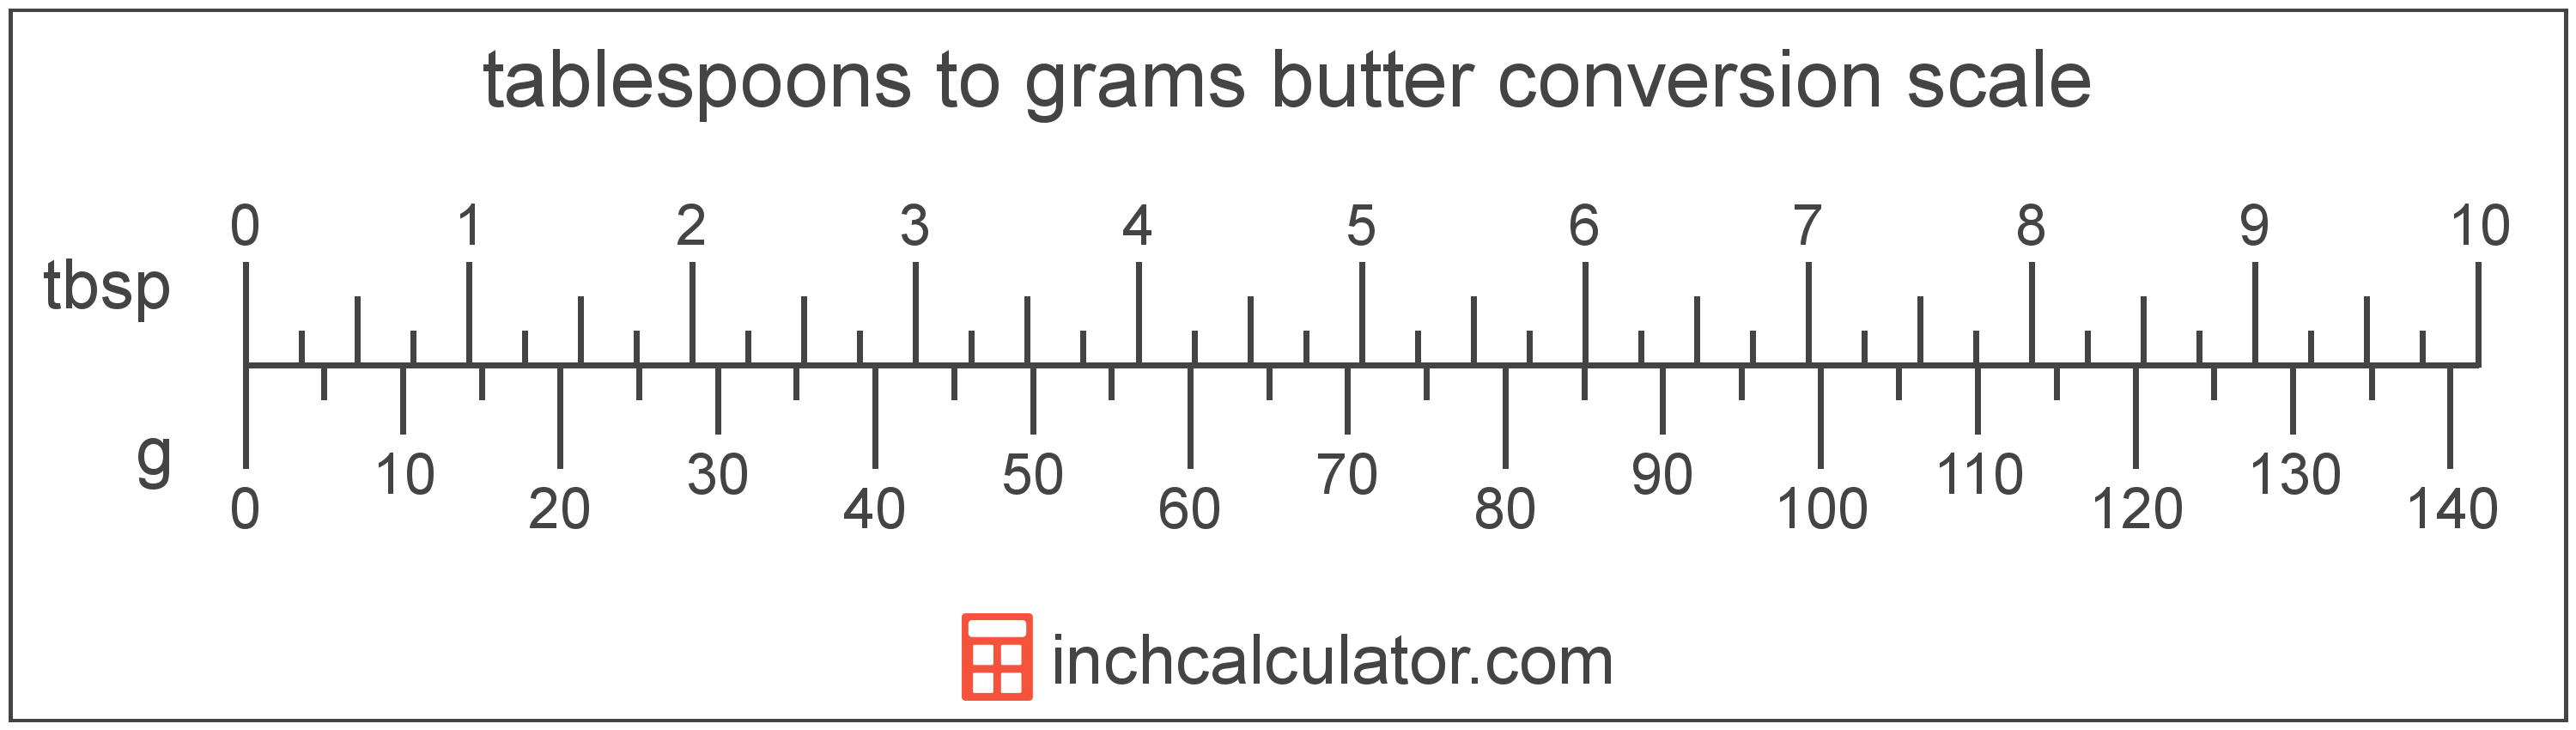 grams-of-butter-to-tablespoons-conversion-g-to-tbsp